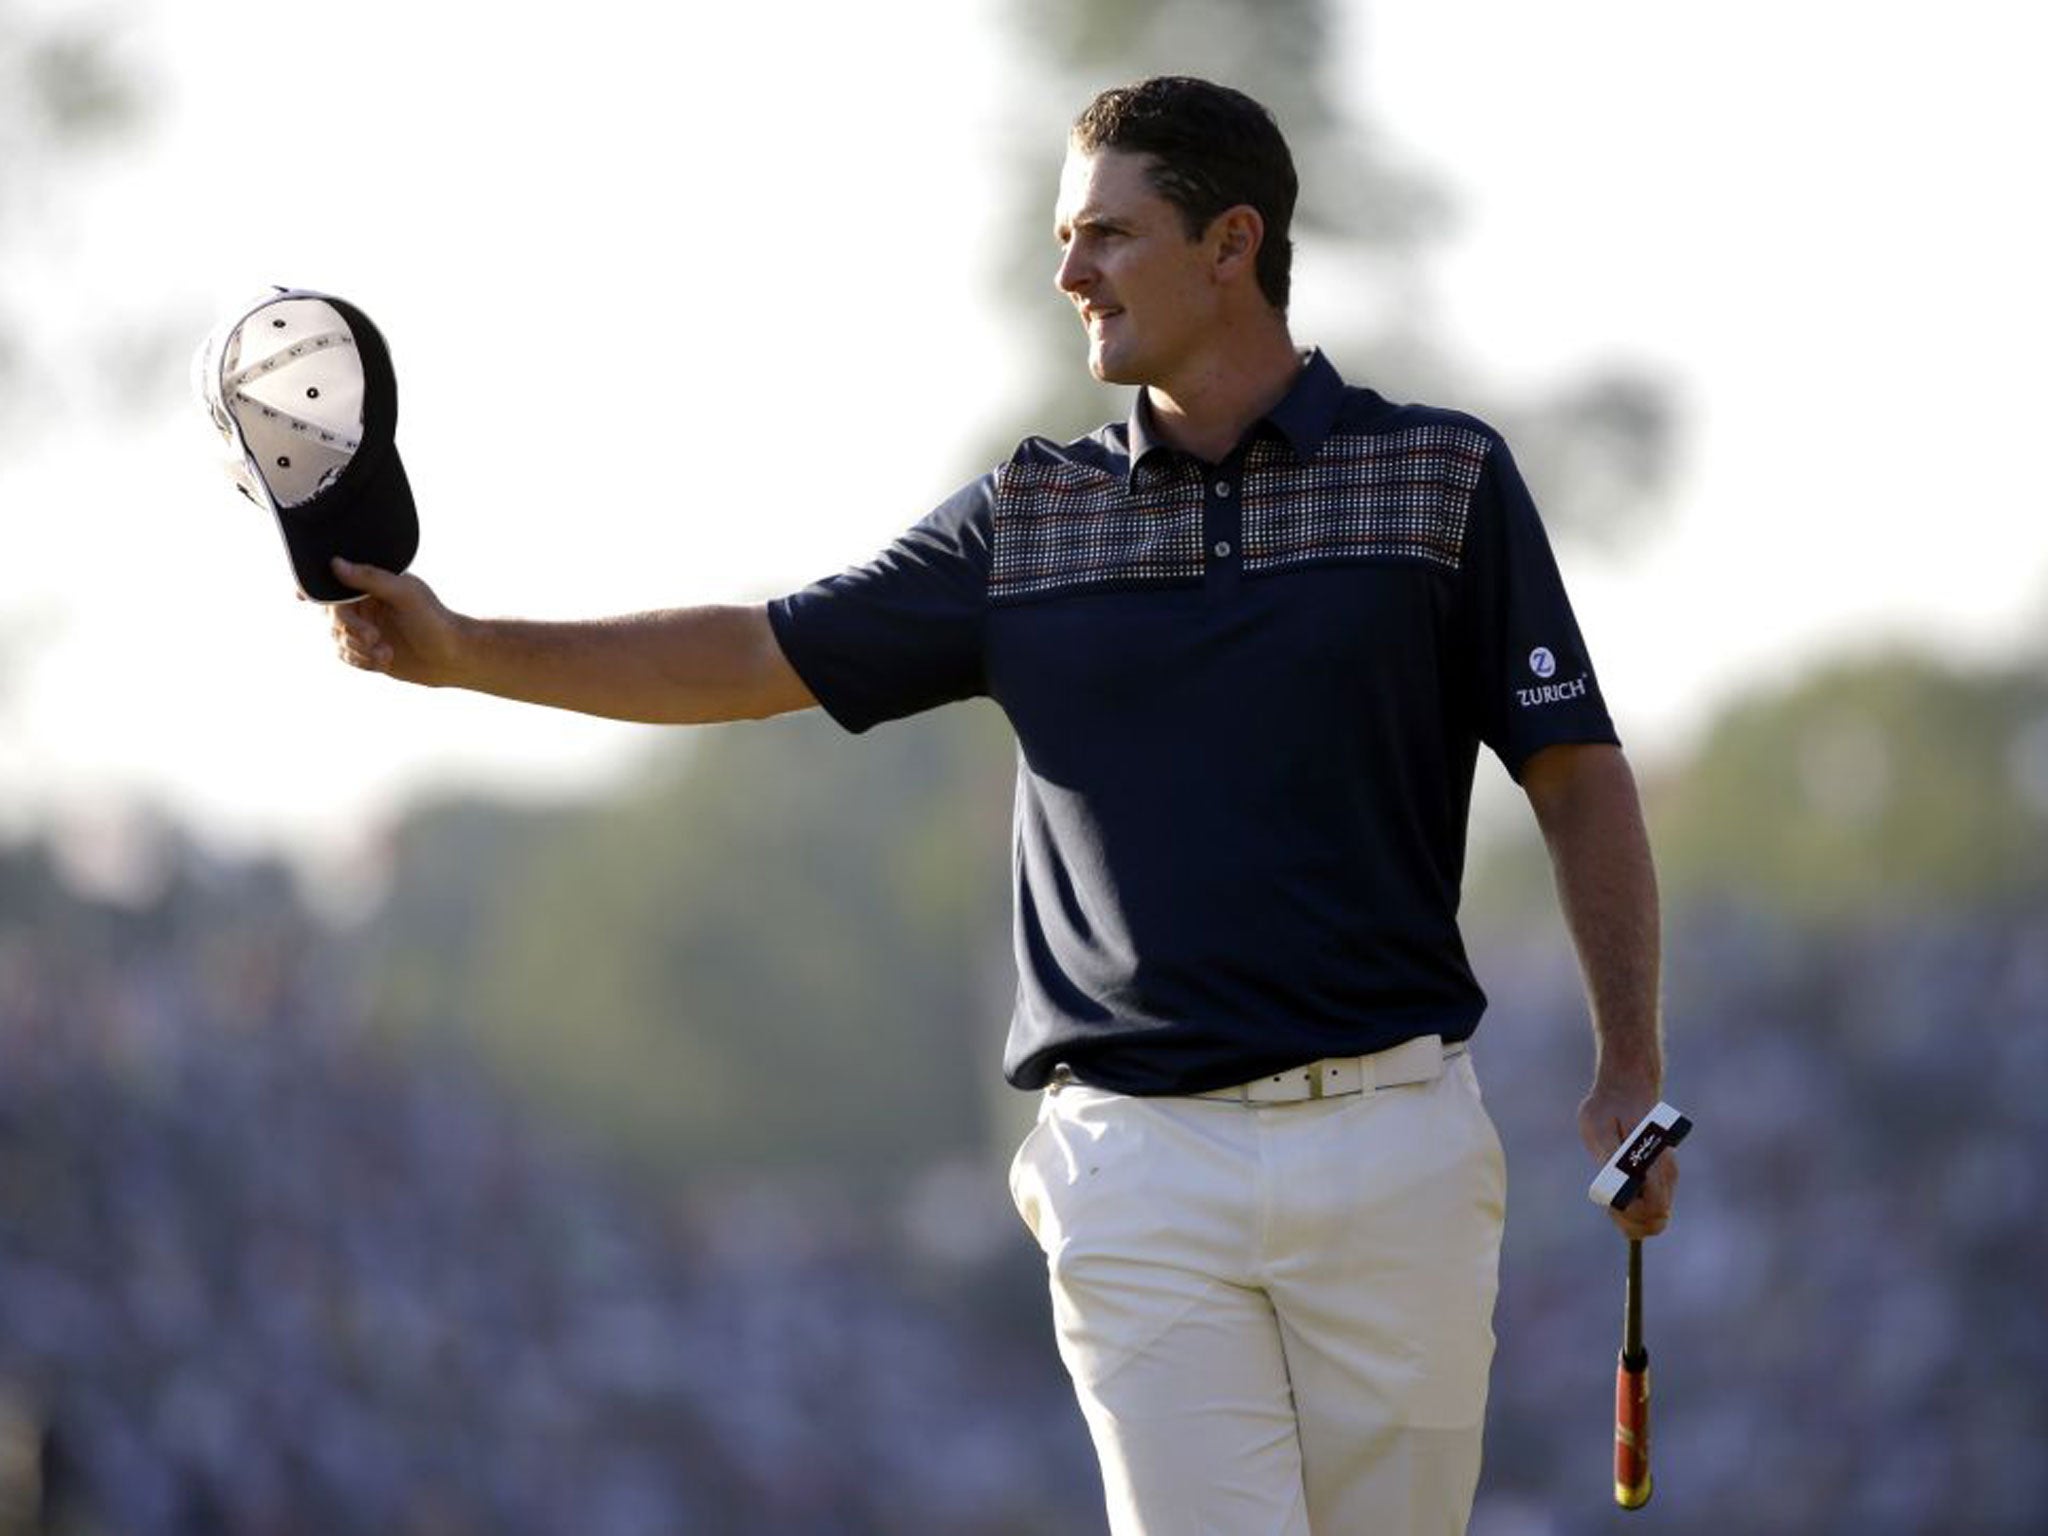 Justin Rose was the last man standing in an epic finale